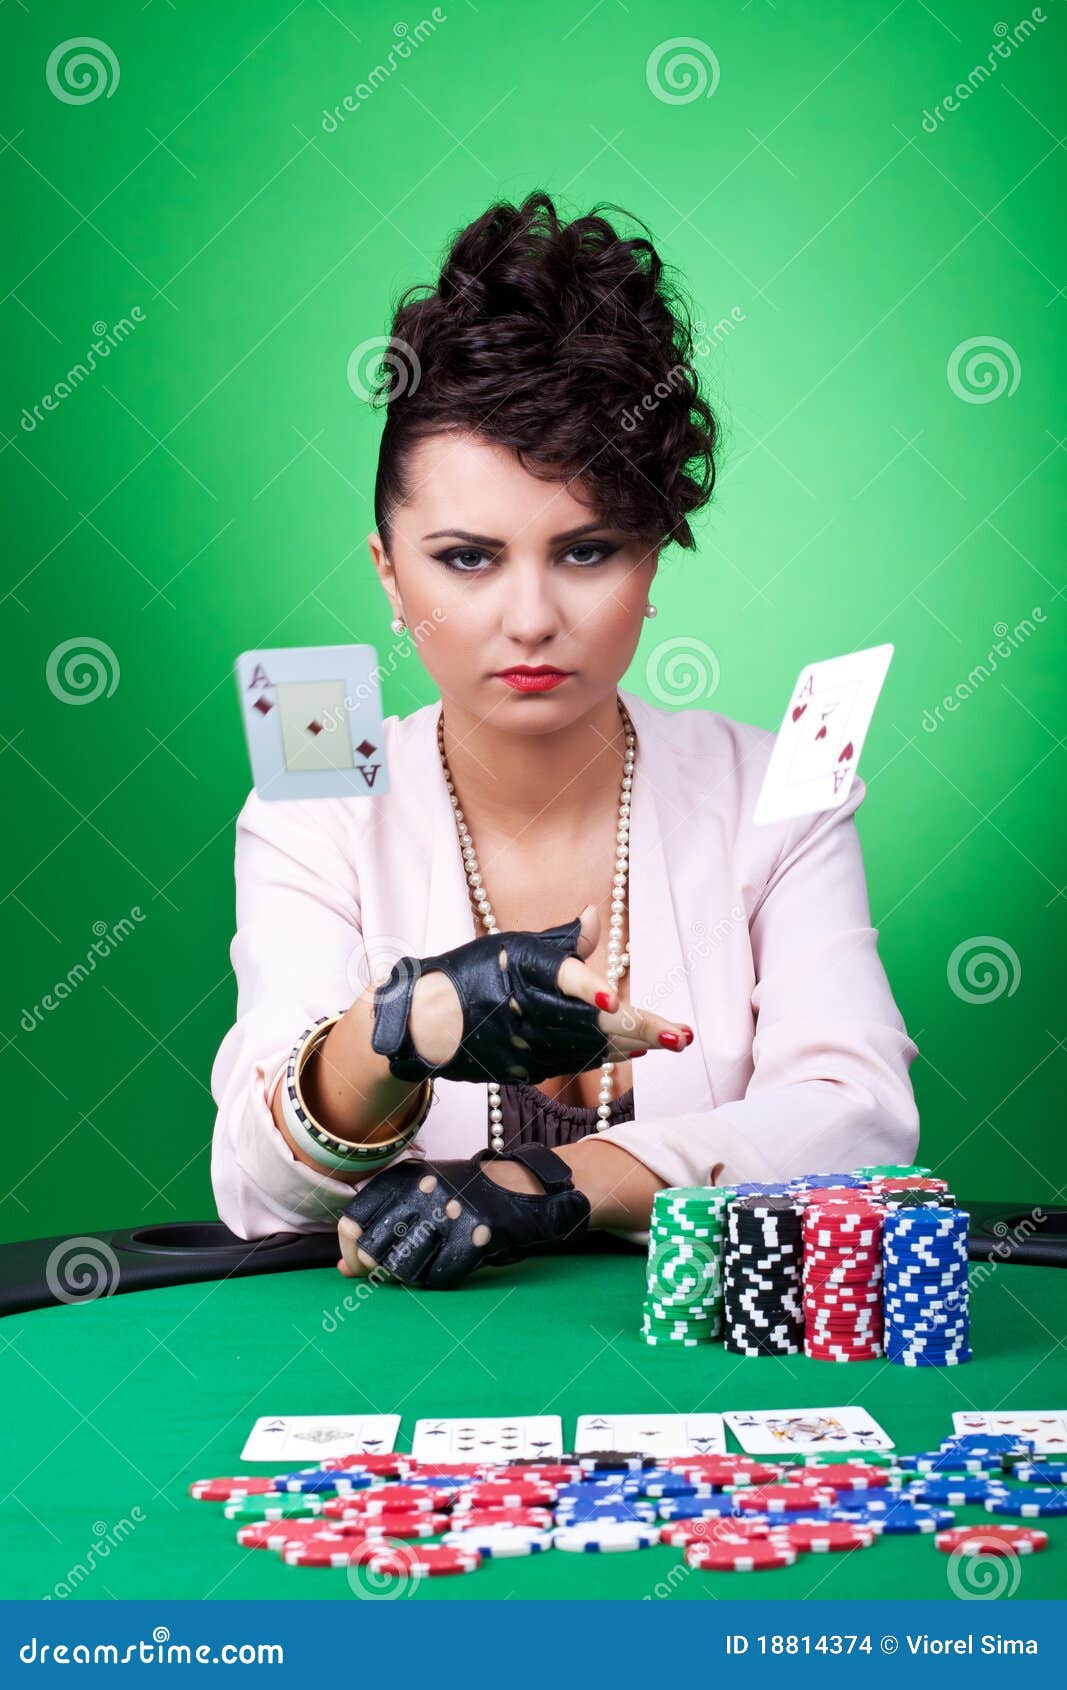 Throwing a Pair of Aces on the Table Stock Photo - Image of games ...